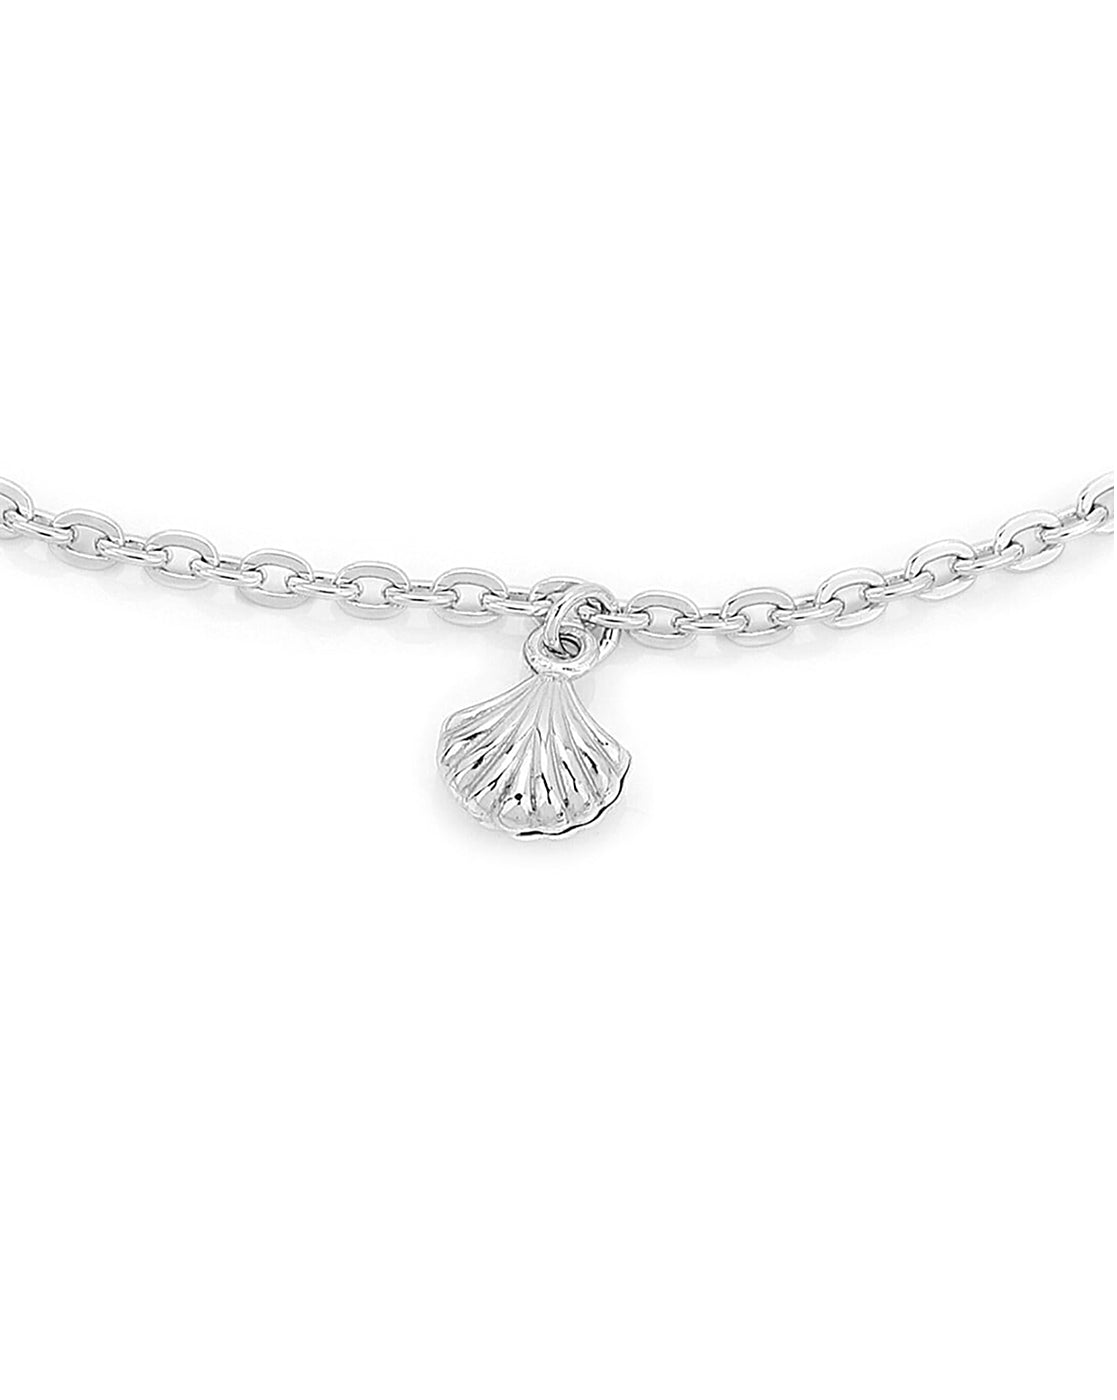 925 Sterling Silver Rhodium Plated And Bead Charm Anklet For Women